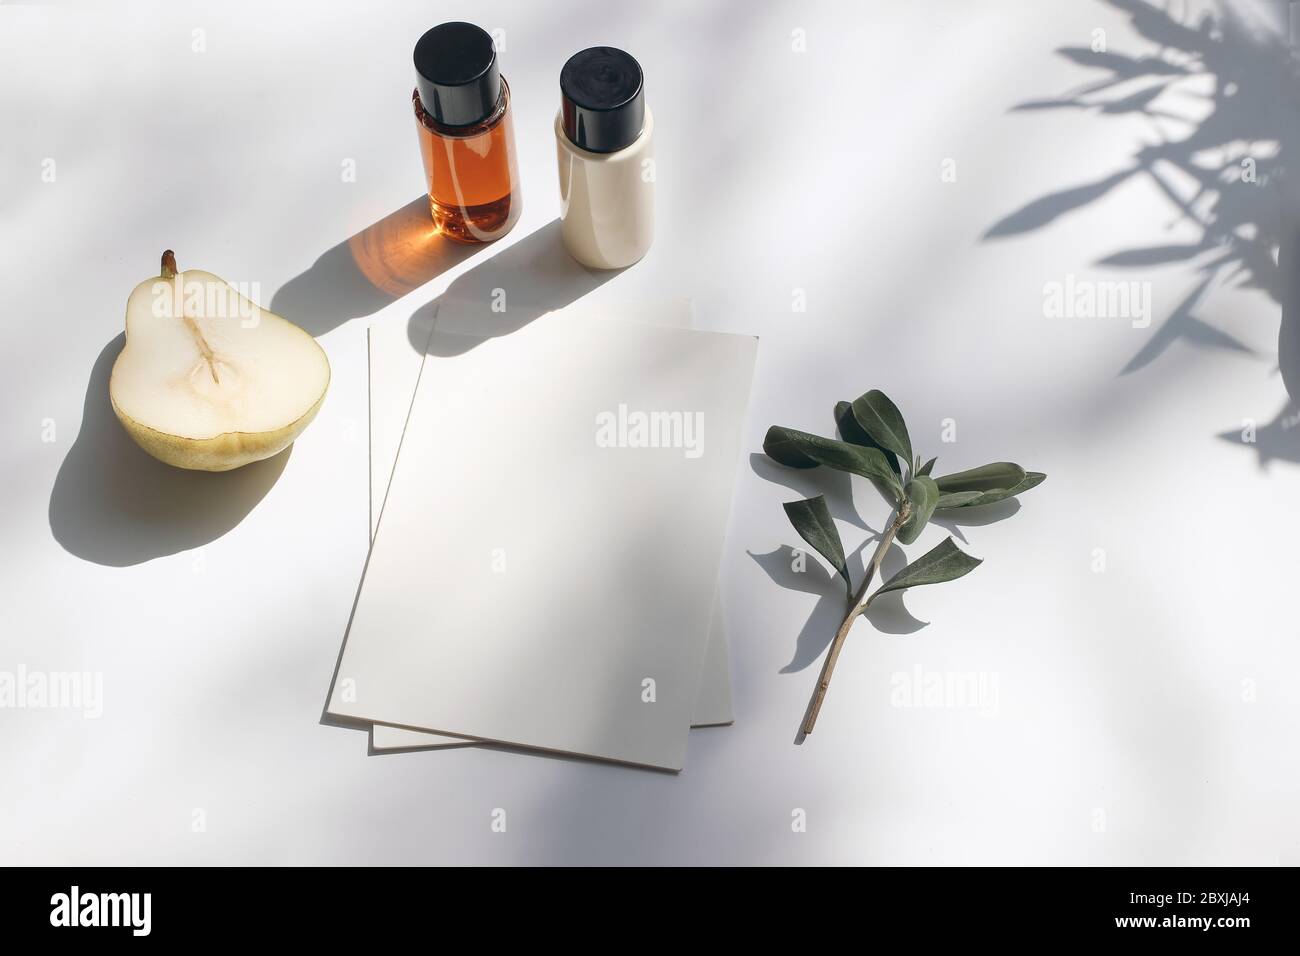 Summer stationery still life scene. Cut pear fruit, cosmetic oil, cream bottles and olive tree branch. White table. Blank paper cards, invitations moc Stock Photo